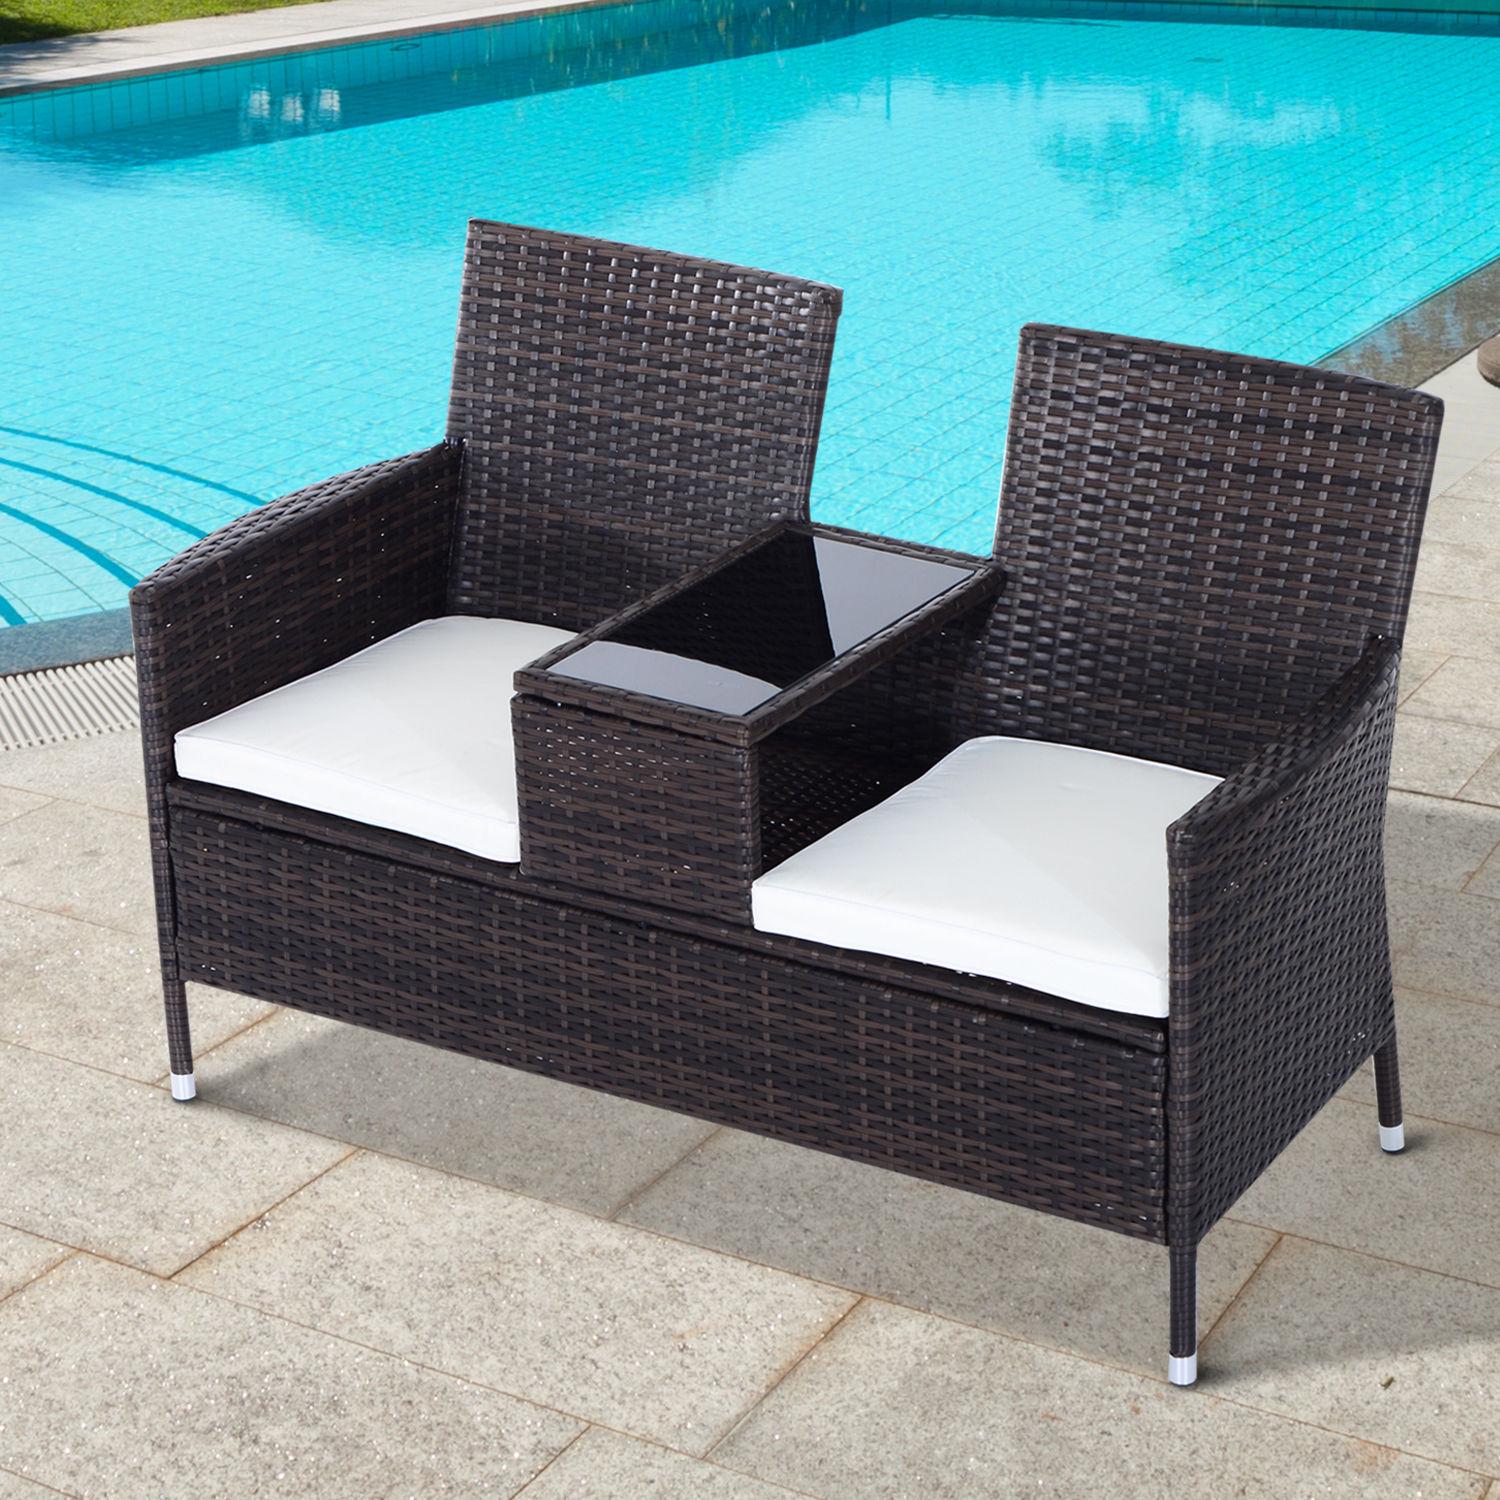 2-Seater Rattan Chair Furniture Set W/ Middle Tea Table-Brown